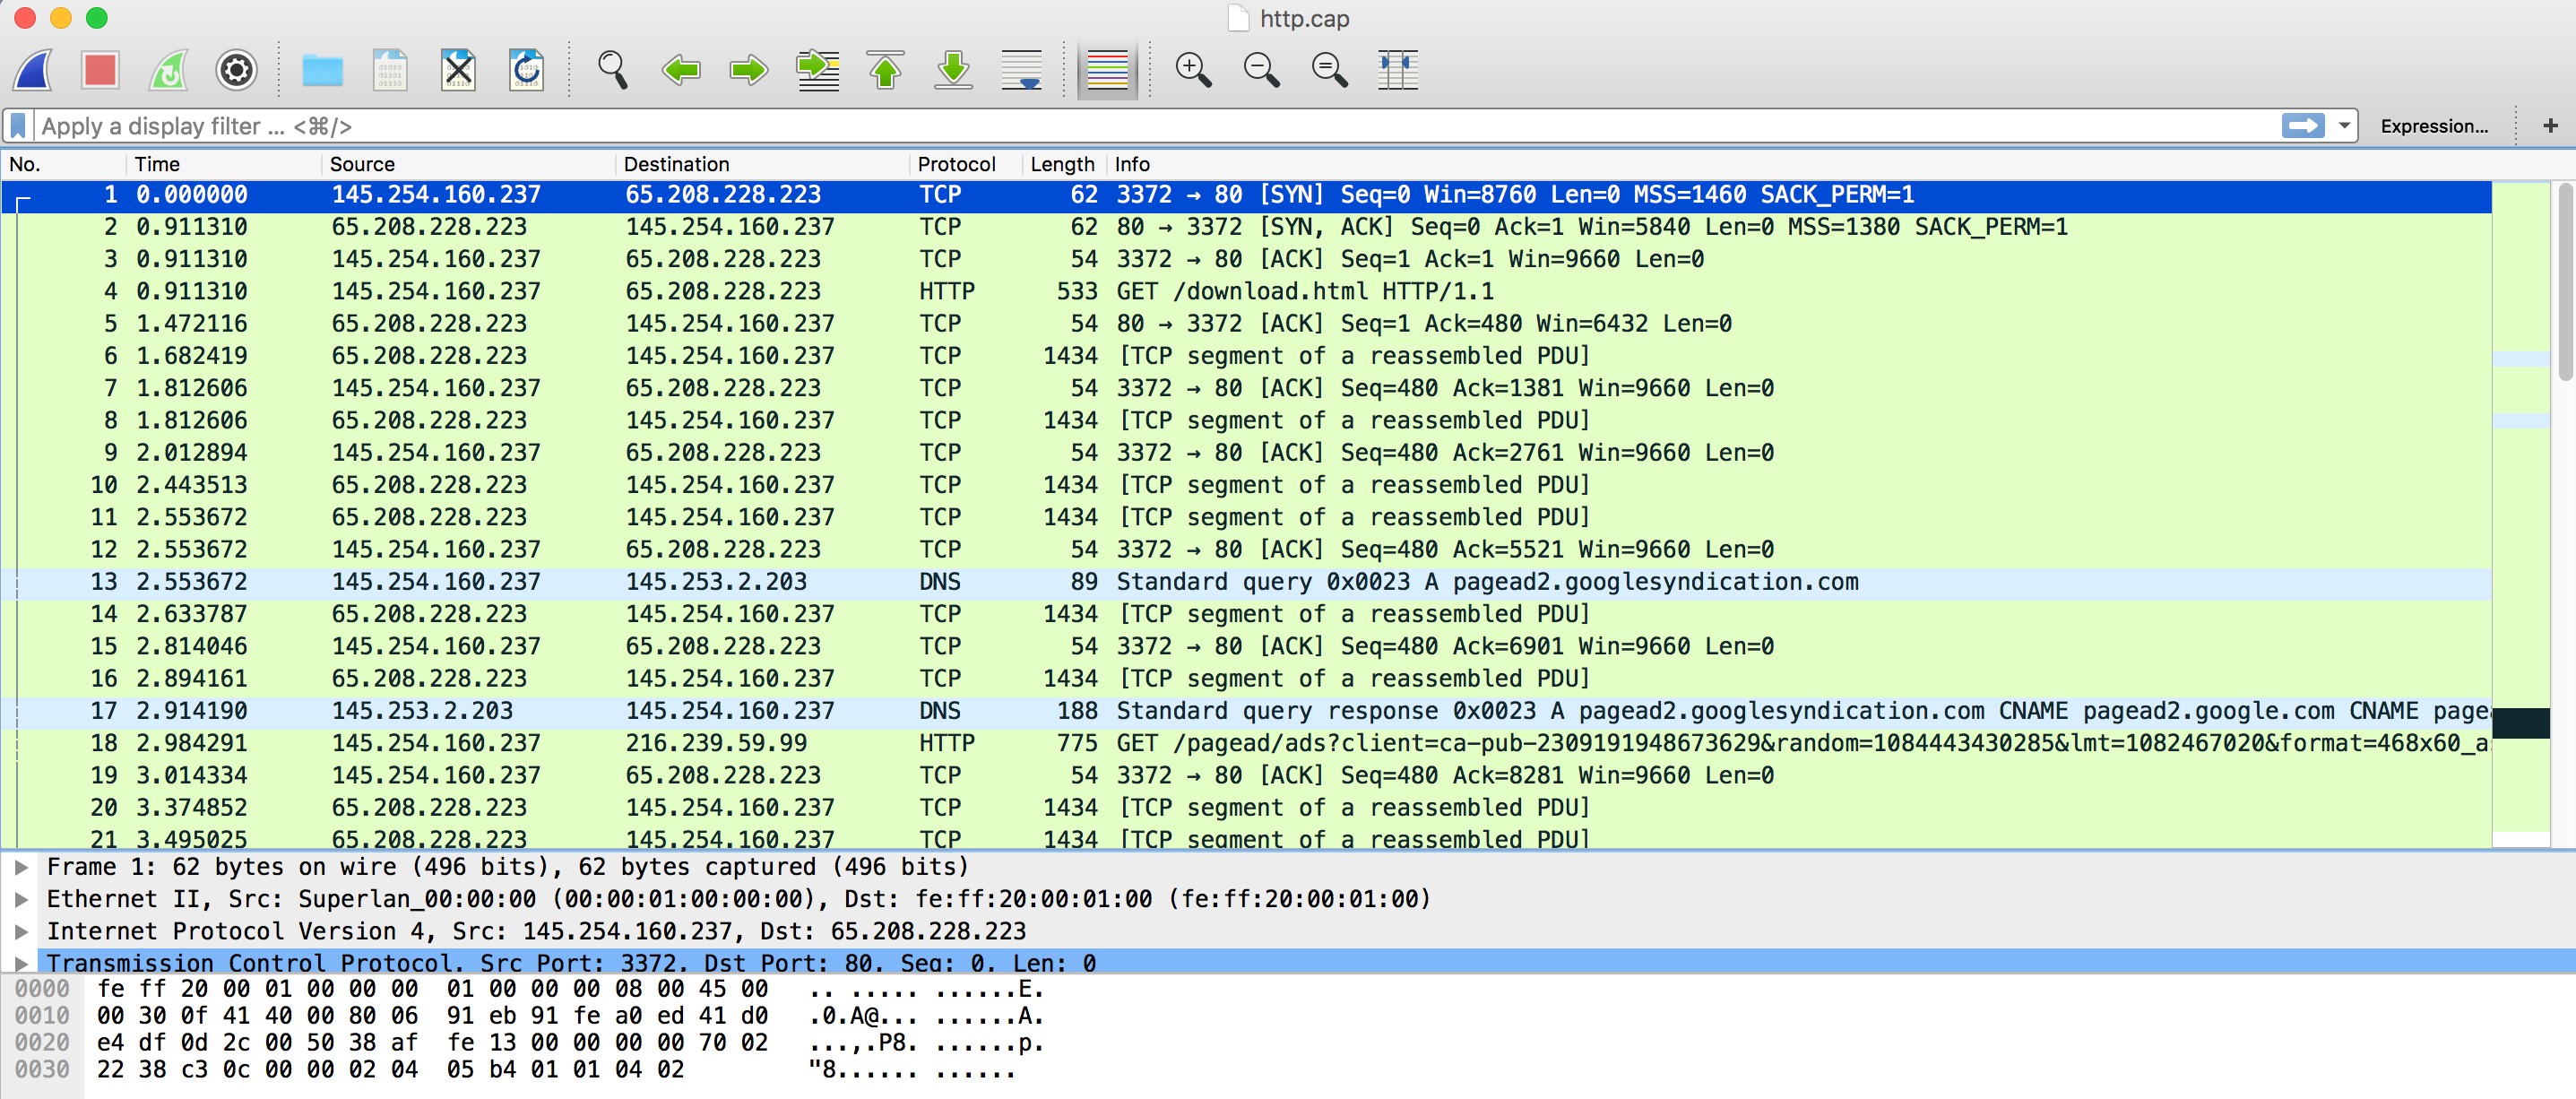 How to analyse wireshark pcap file - aslretail